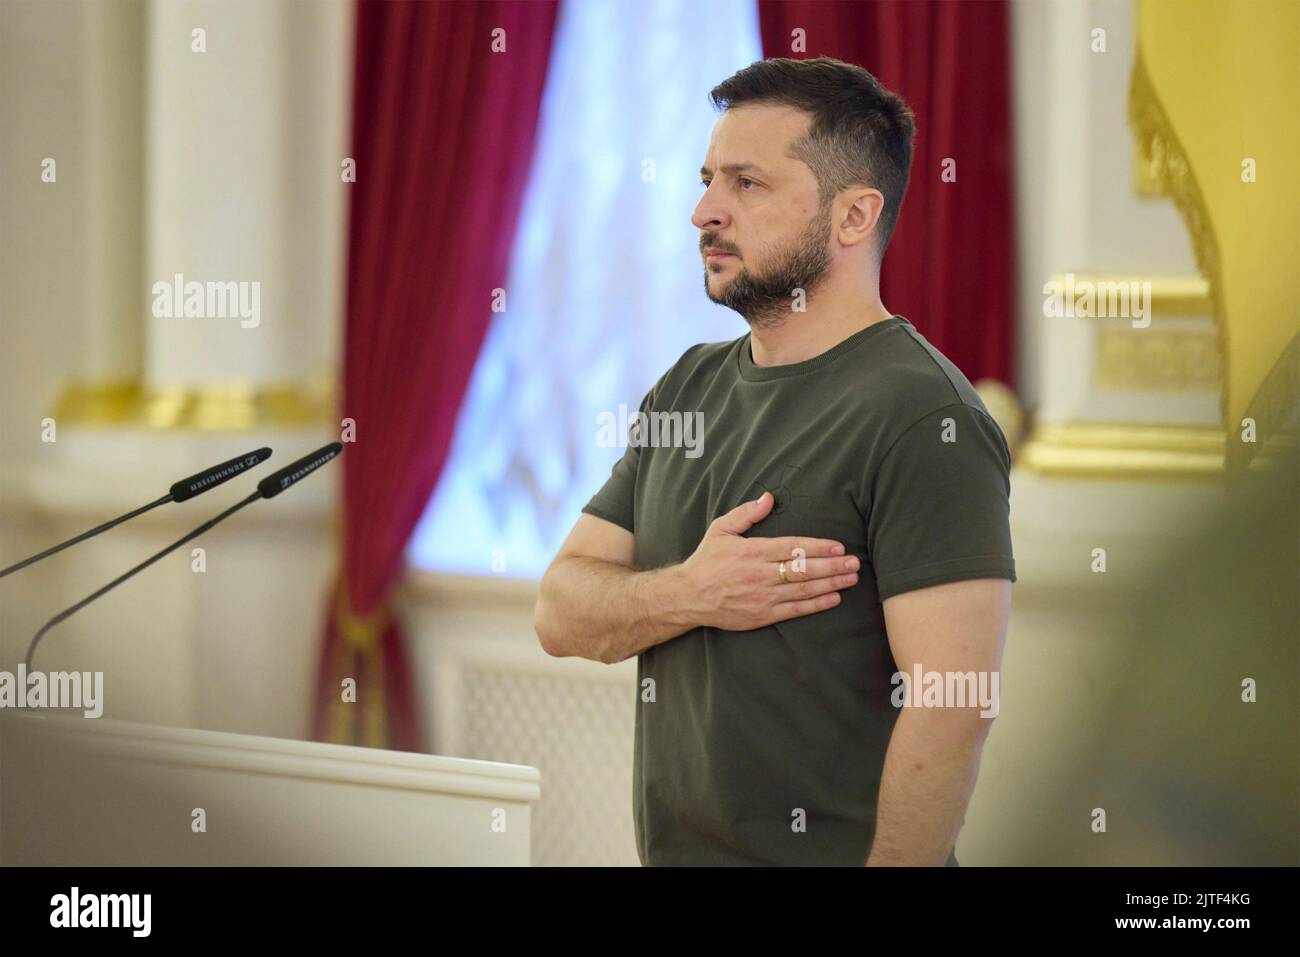 Kyiv, Ukraine. 29th Aug, 2022. Ukrainian President Volodymyr Zelenskyy, stands for the national anthem during a presentation of Gold Star Orders to the relatives of fallen Ukrainian defenders in the White Hall of Heroes at the Mariinskyi Palace, August 29, 2022 in Kyiv, Ukraine. Credit: Sarsenov Daniiar/Ukraine Presidency/Alamy Live News Stock Photo